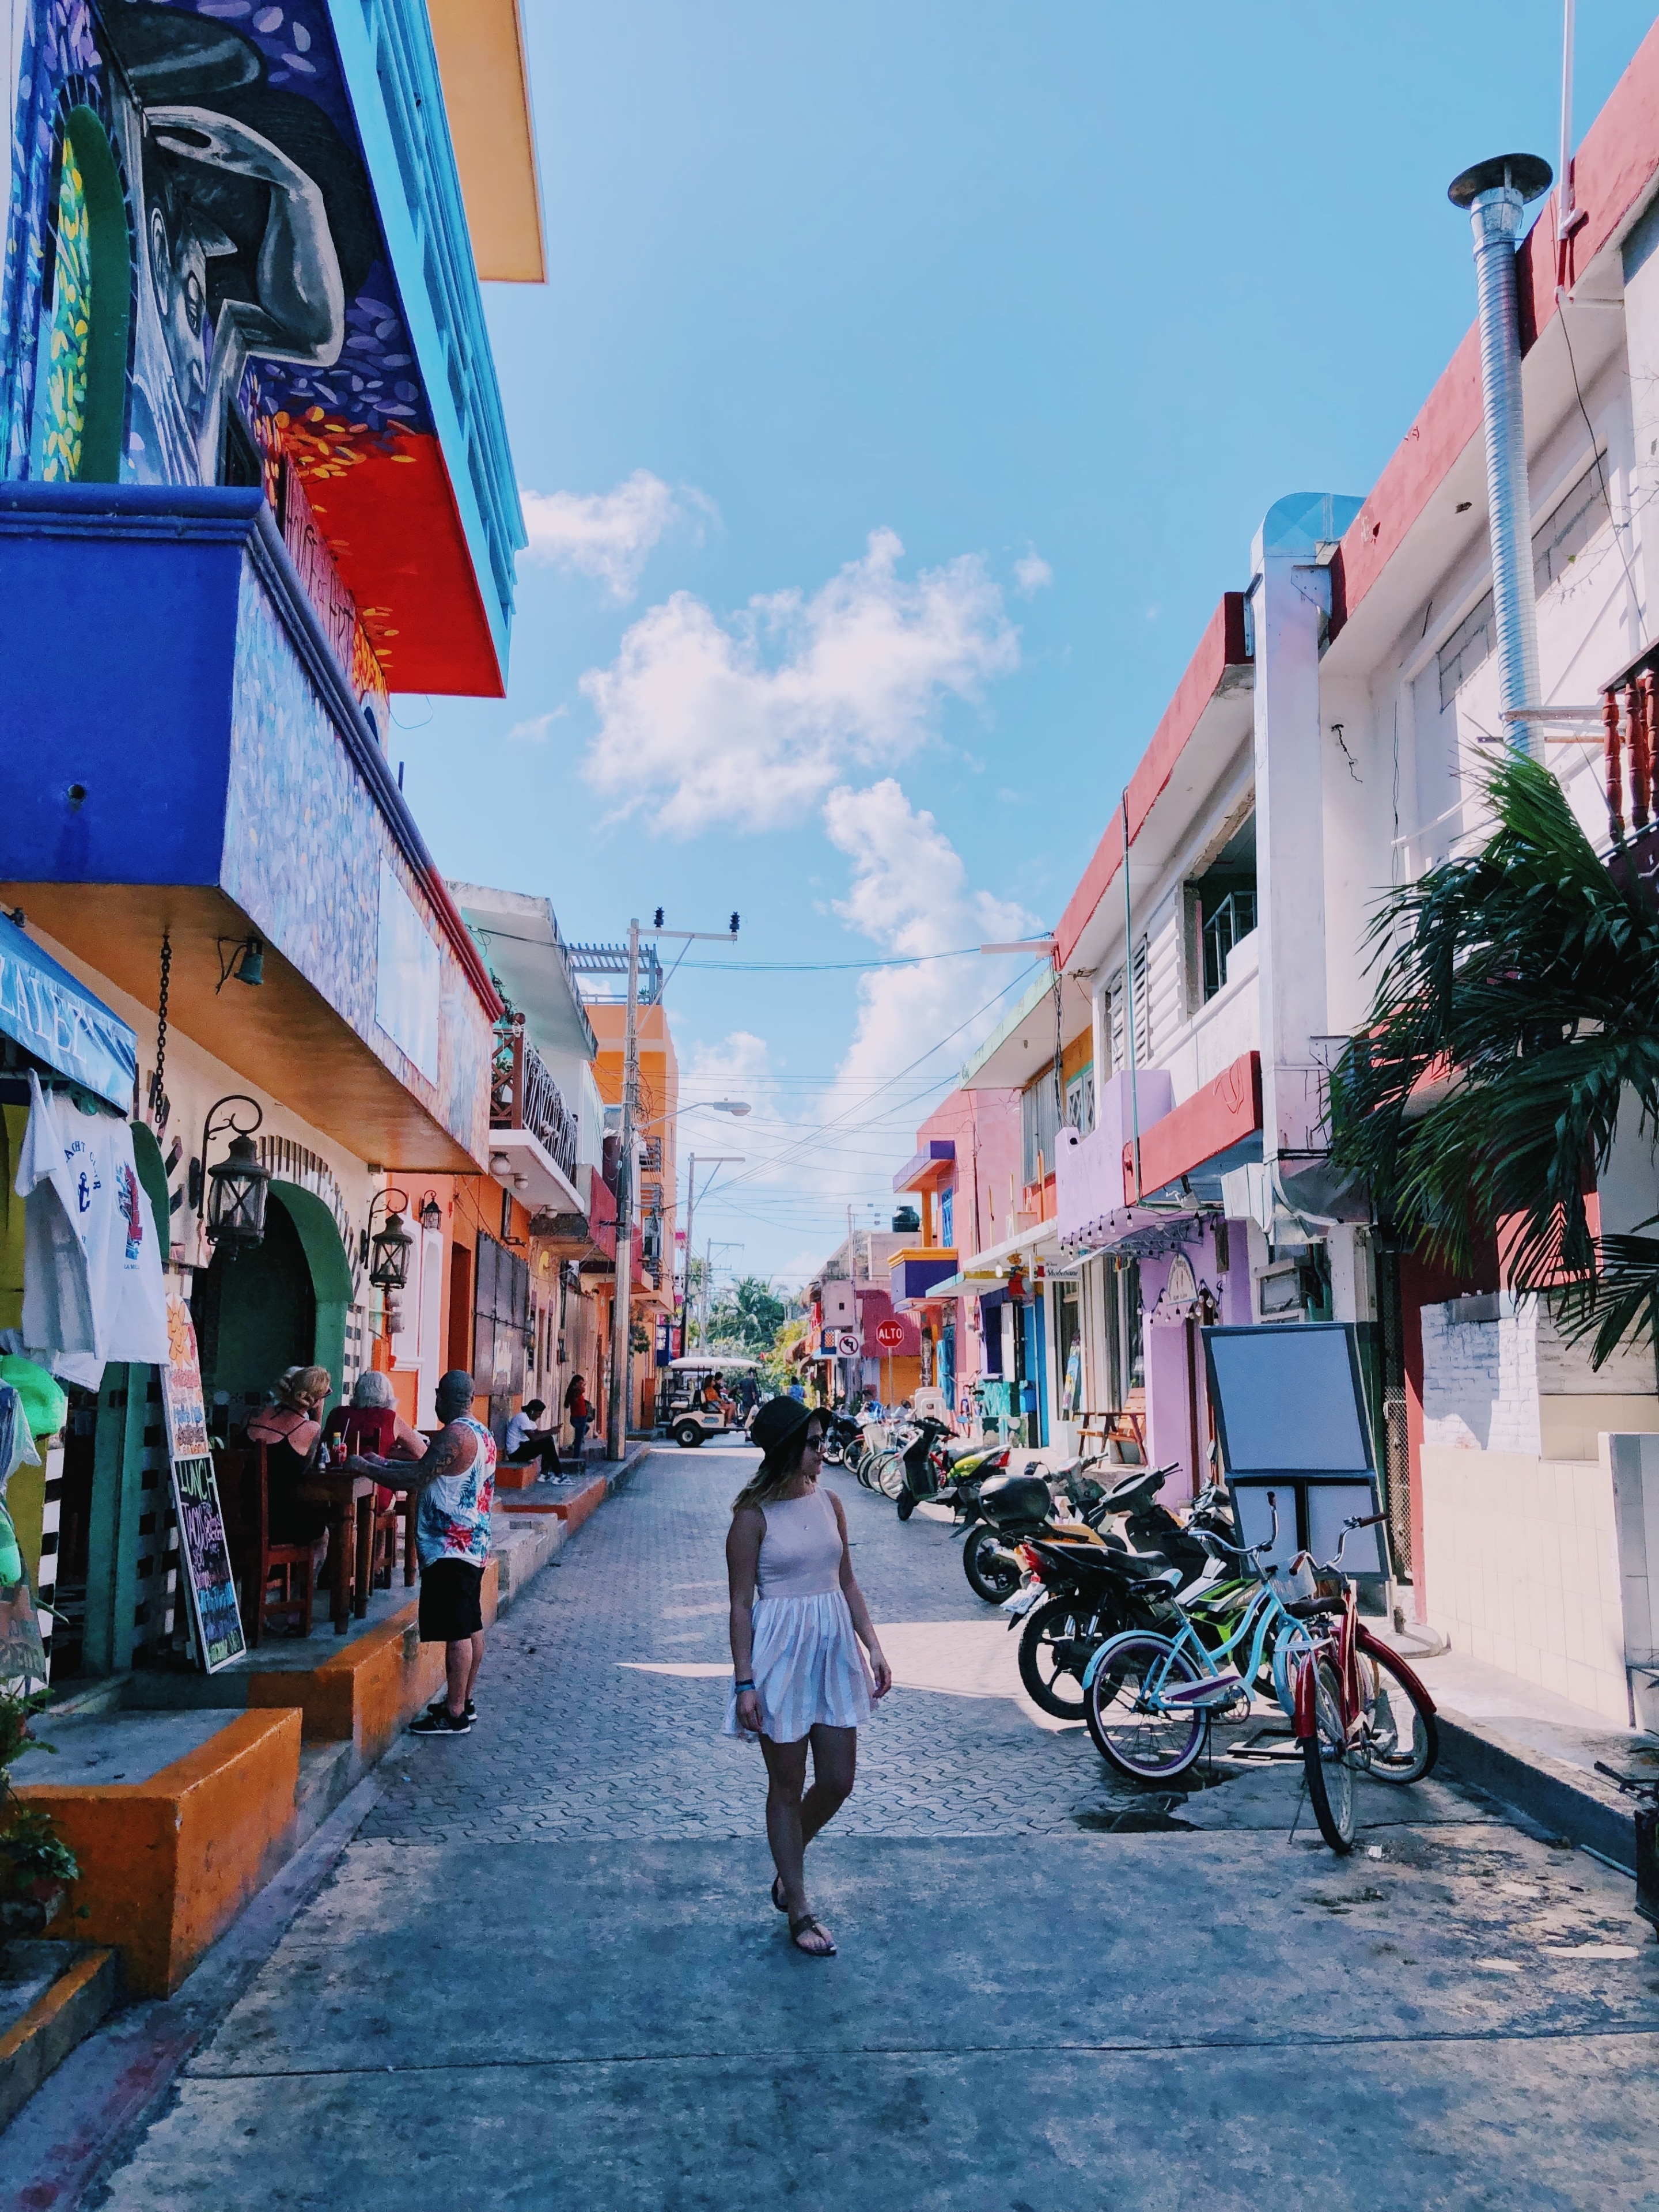 Exploring the lovely streets of Isla Mujeres. #OnTheRoad